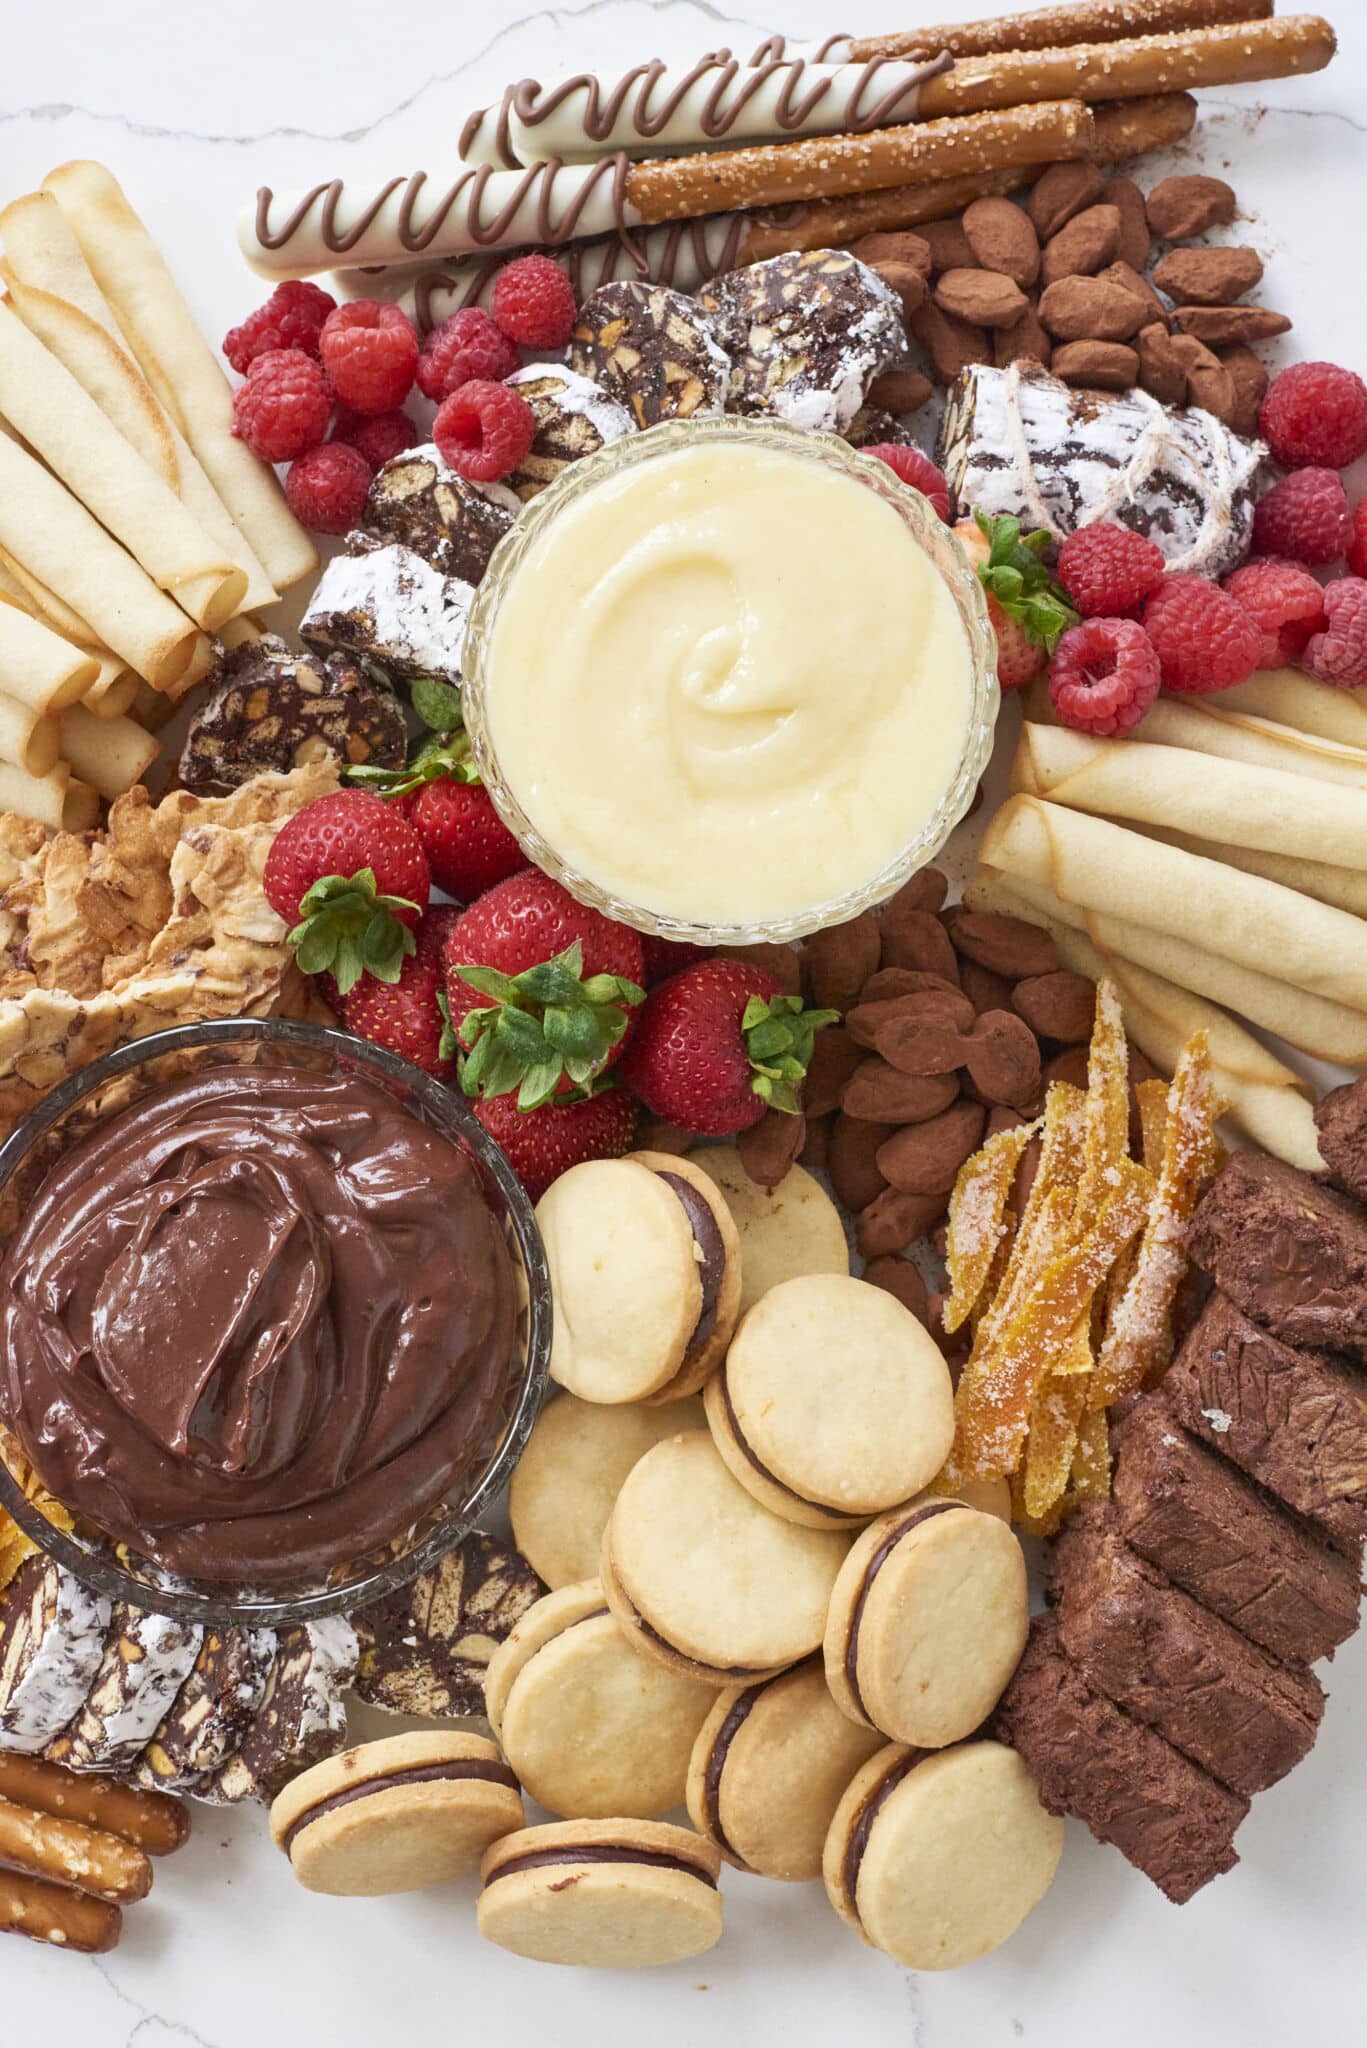 A top down view of the arranged dessert charcuterie board with chocolate dips, cookies, fresh fruit, and nuts on a marble serving tray.